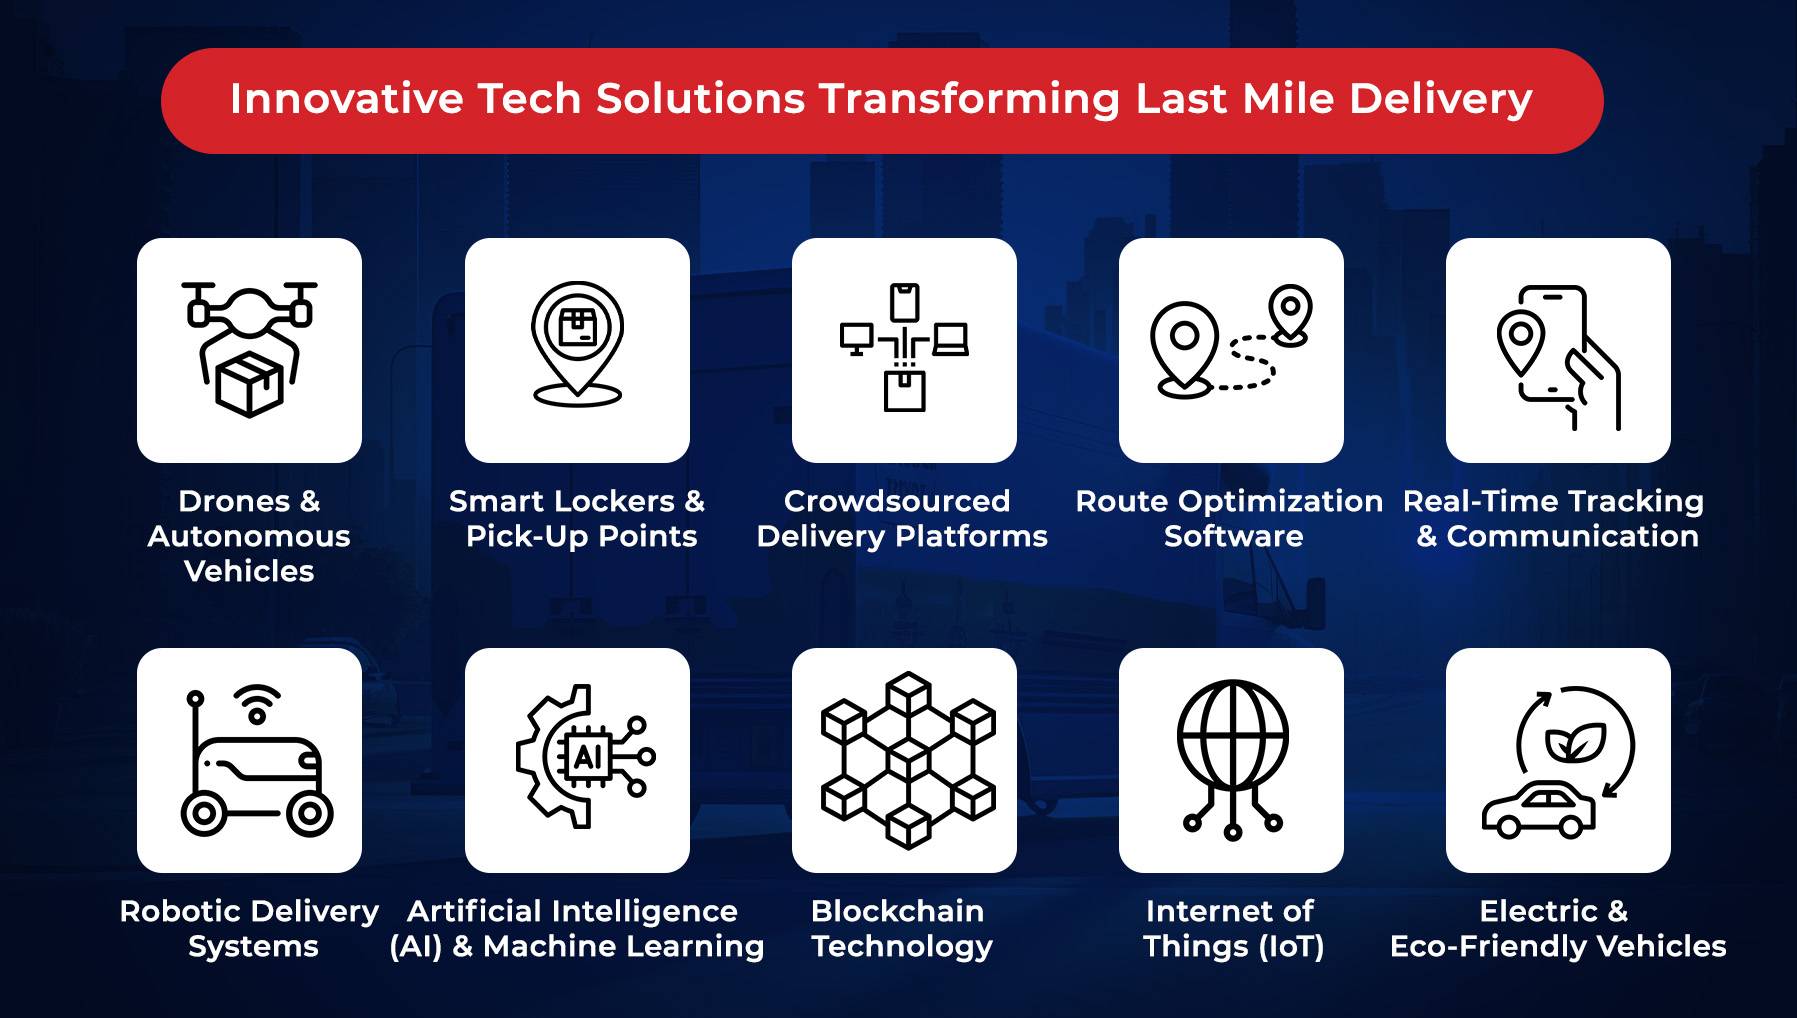 Innovative tech solutions for Last Mile Delivery